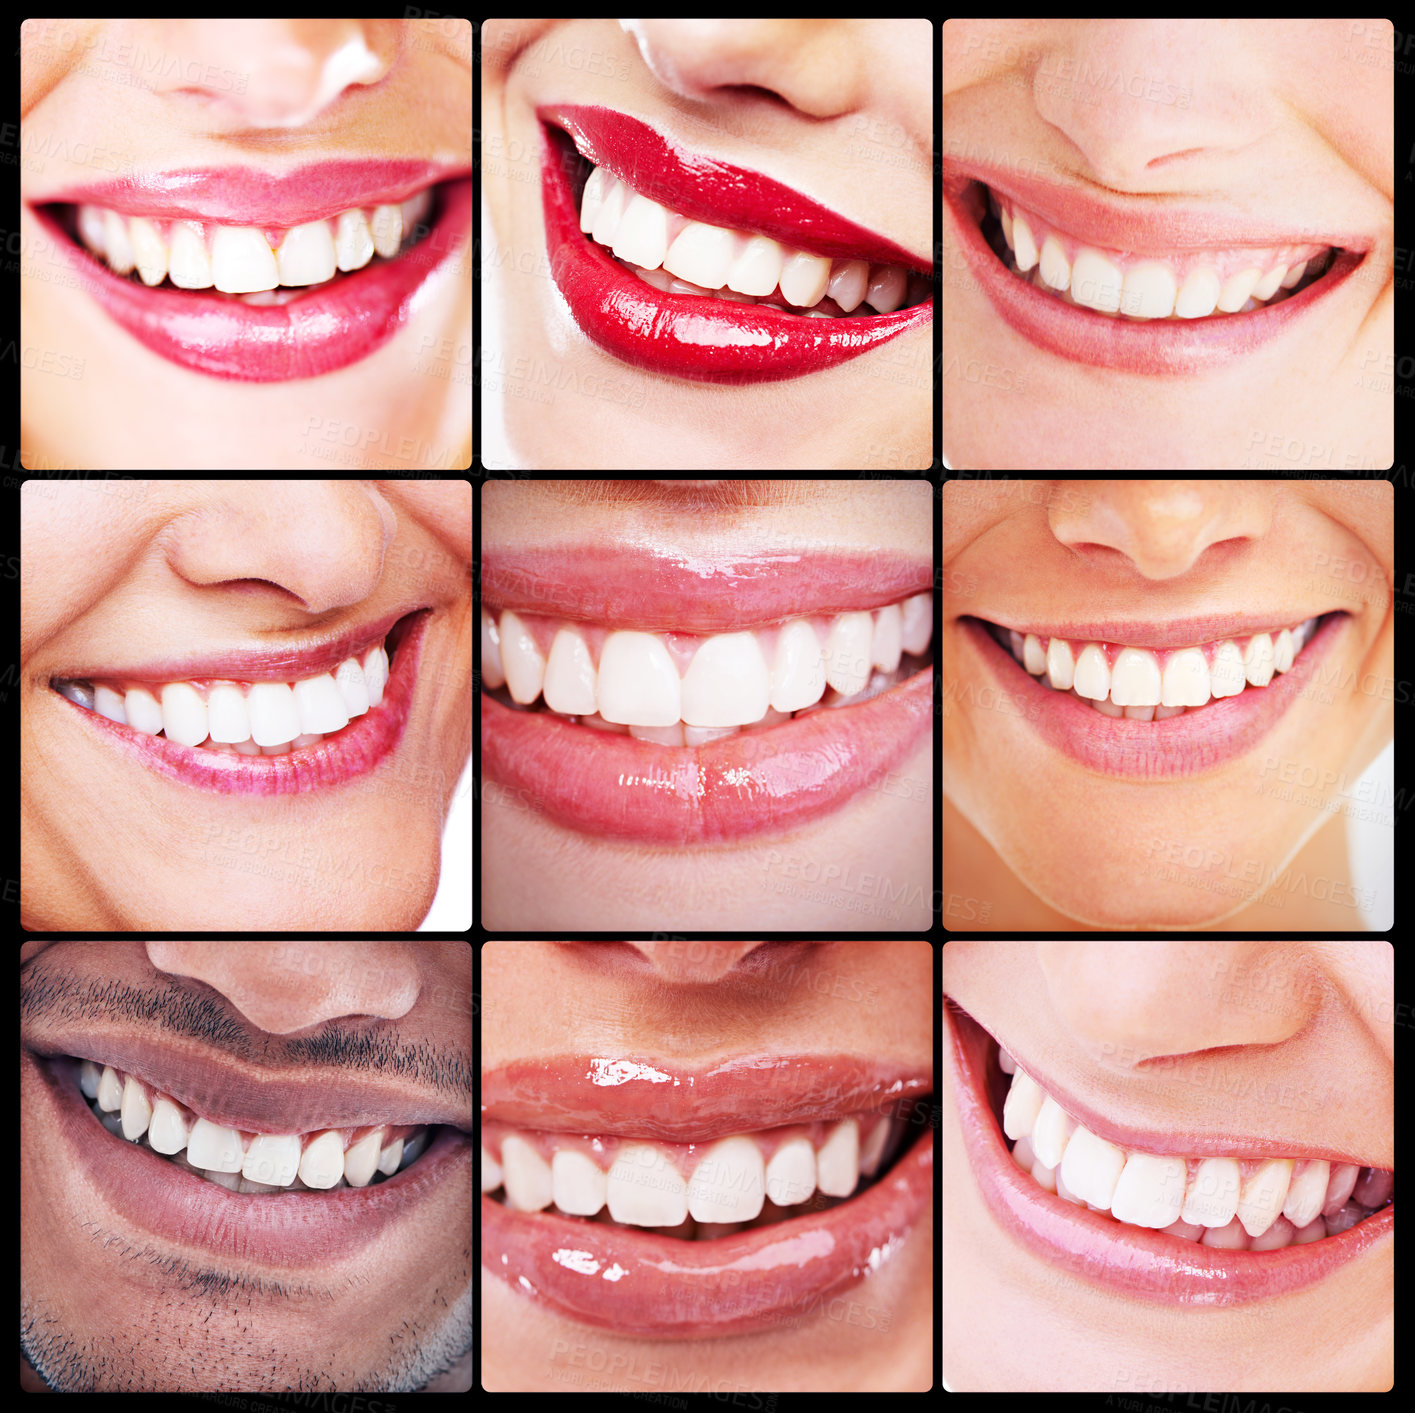 Buy stock photo Dentistry, health and collage of teeth smiles with dental wellness and fresh mouth routine. Self care, cosmetic and montage of a diverse group of people with a clean, healthy and organic oral hygiene